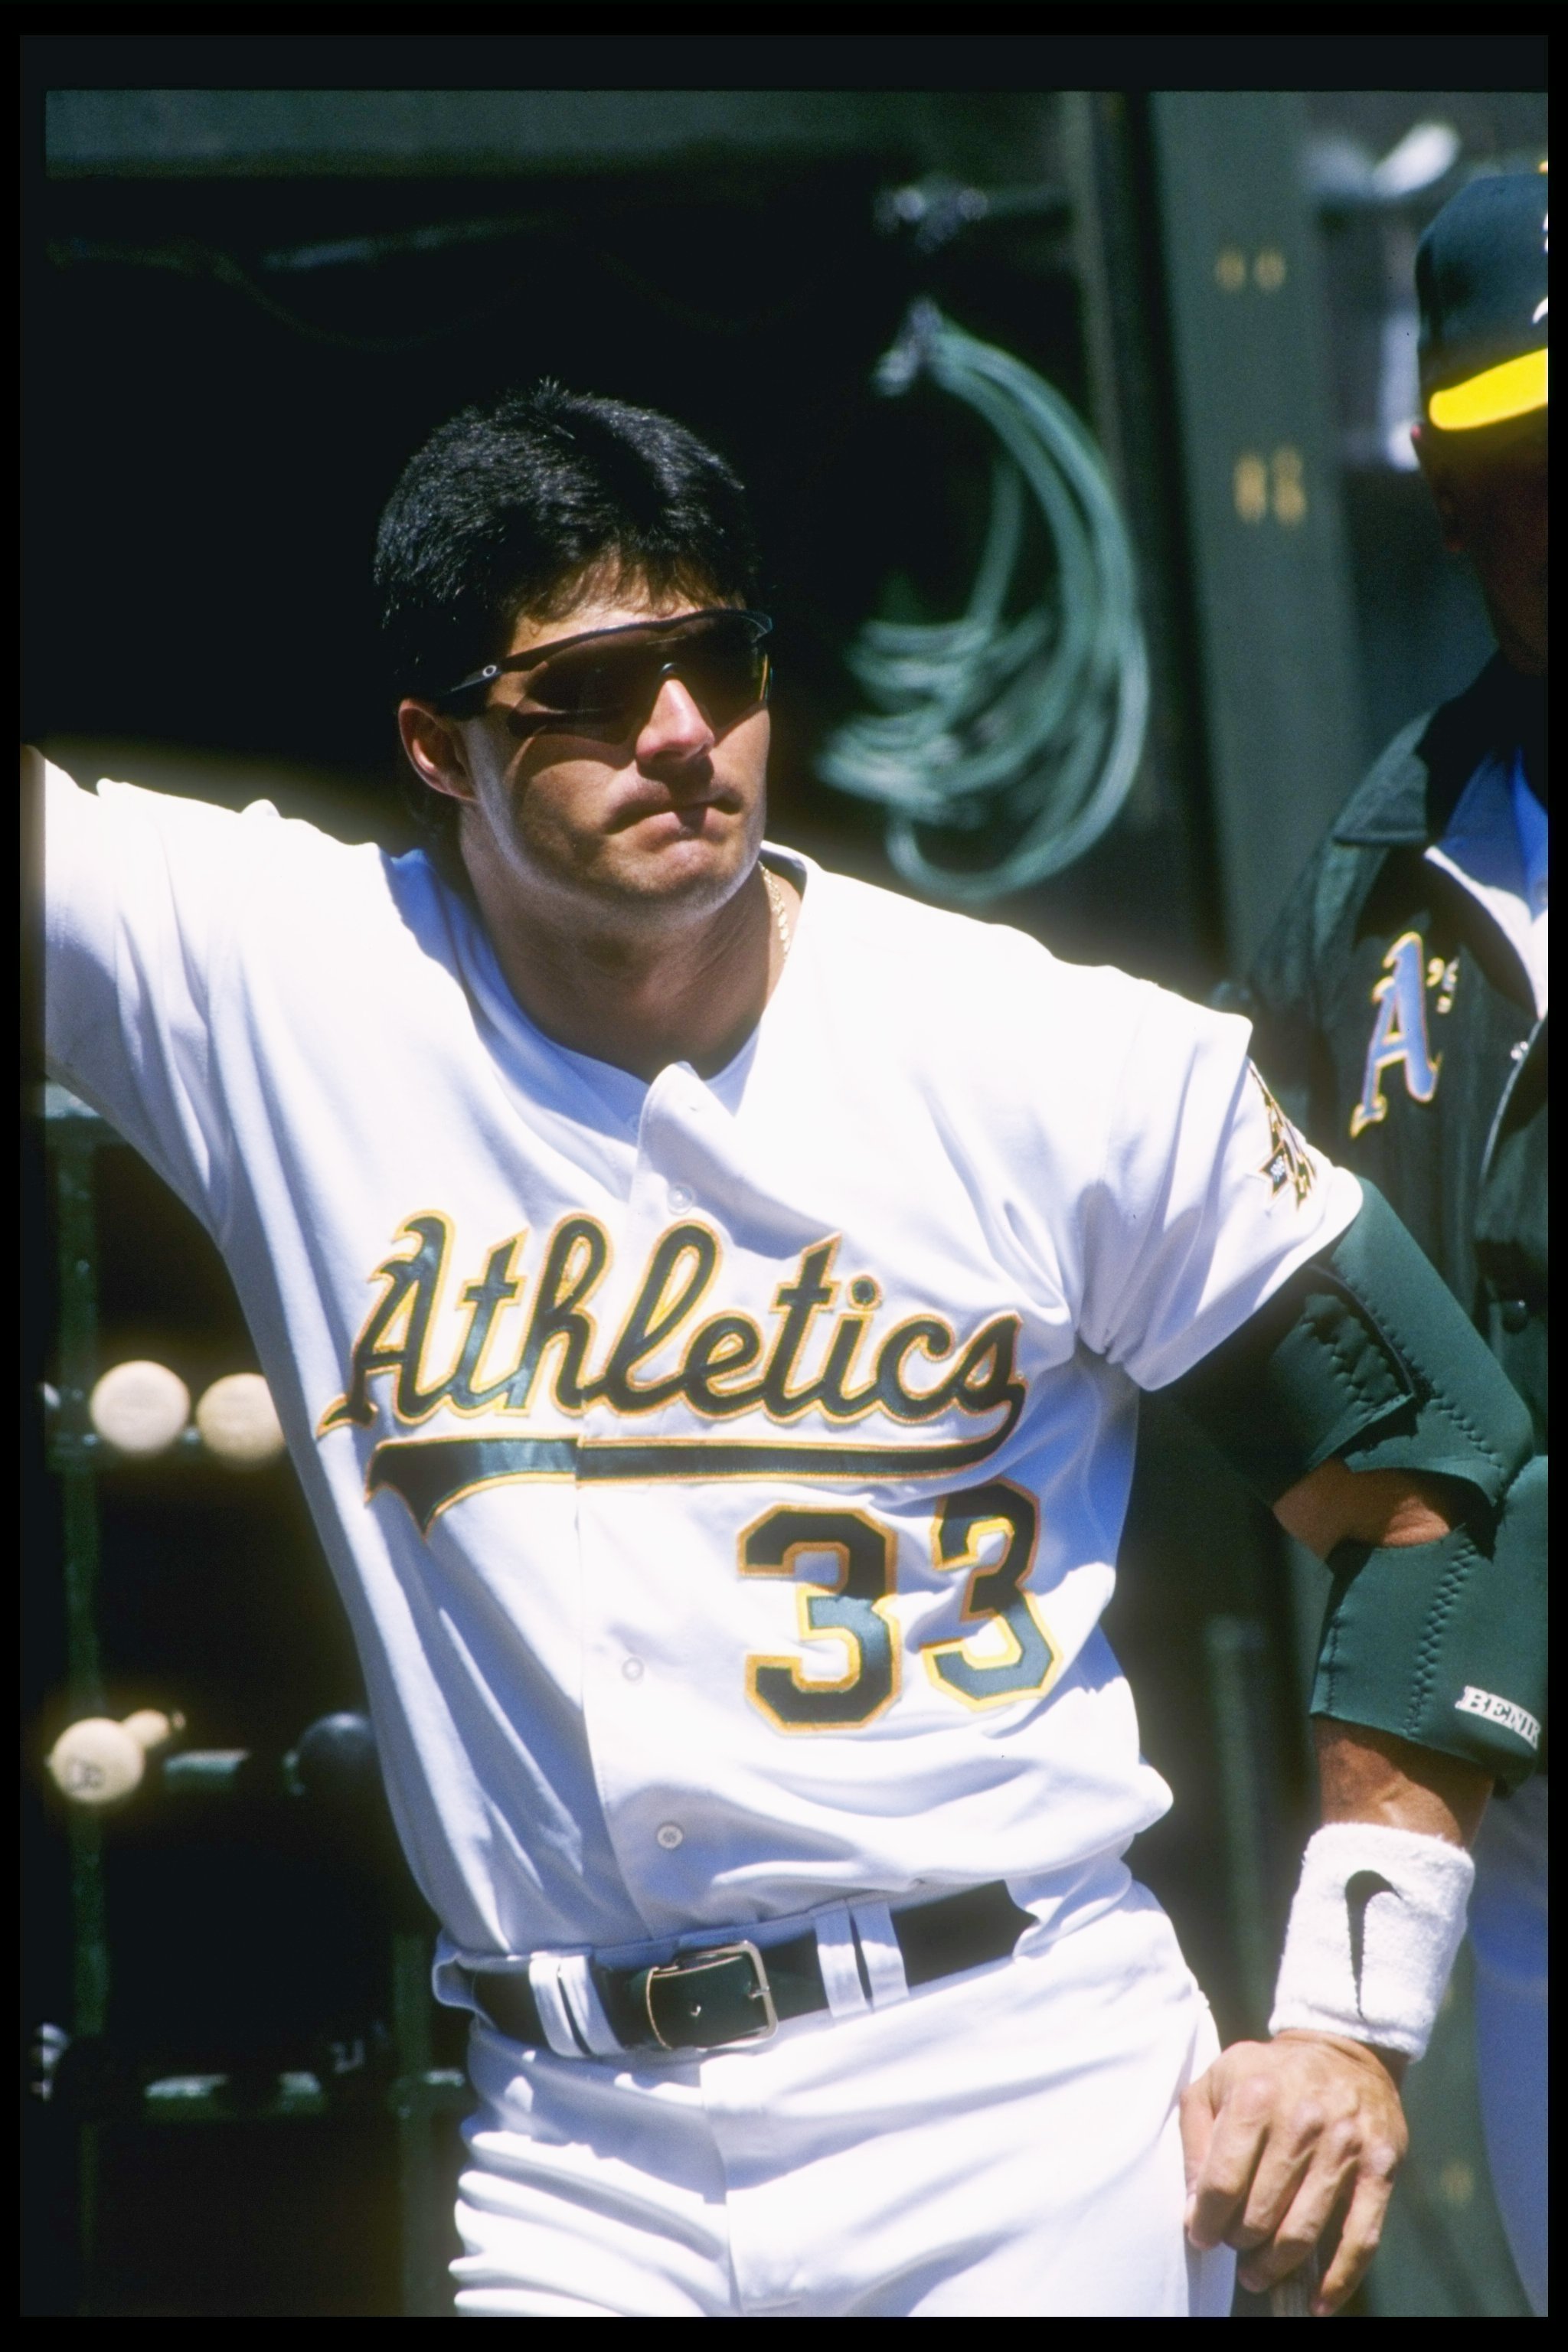 jose canseco a's jersey